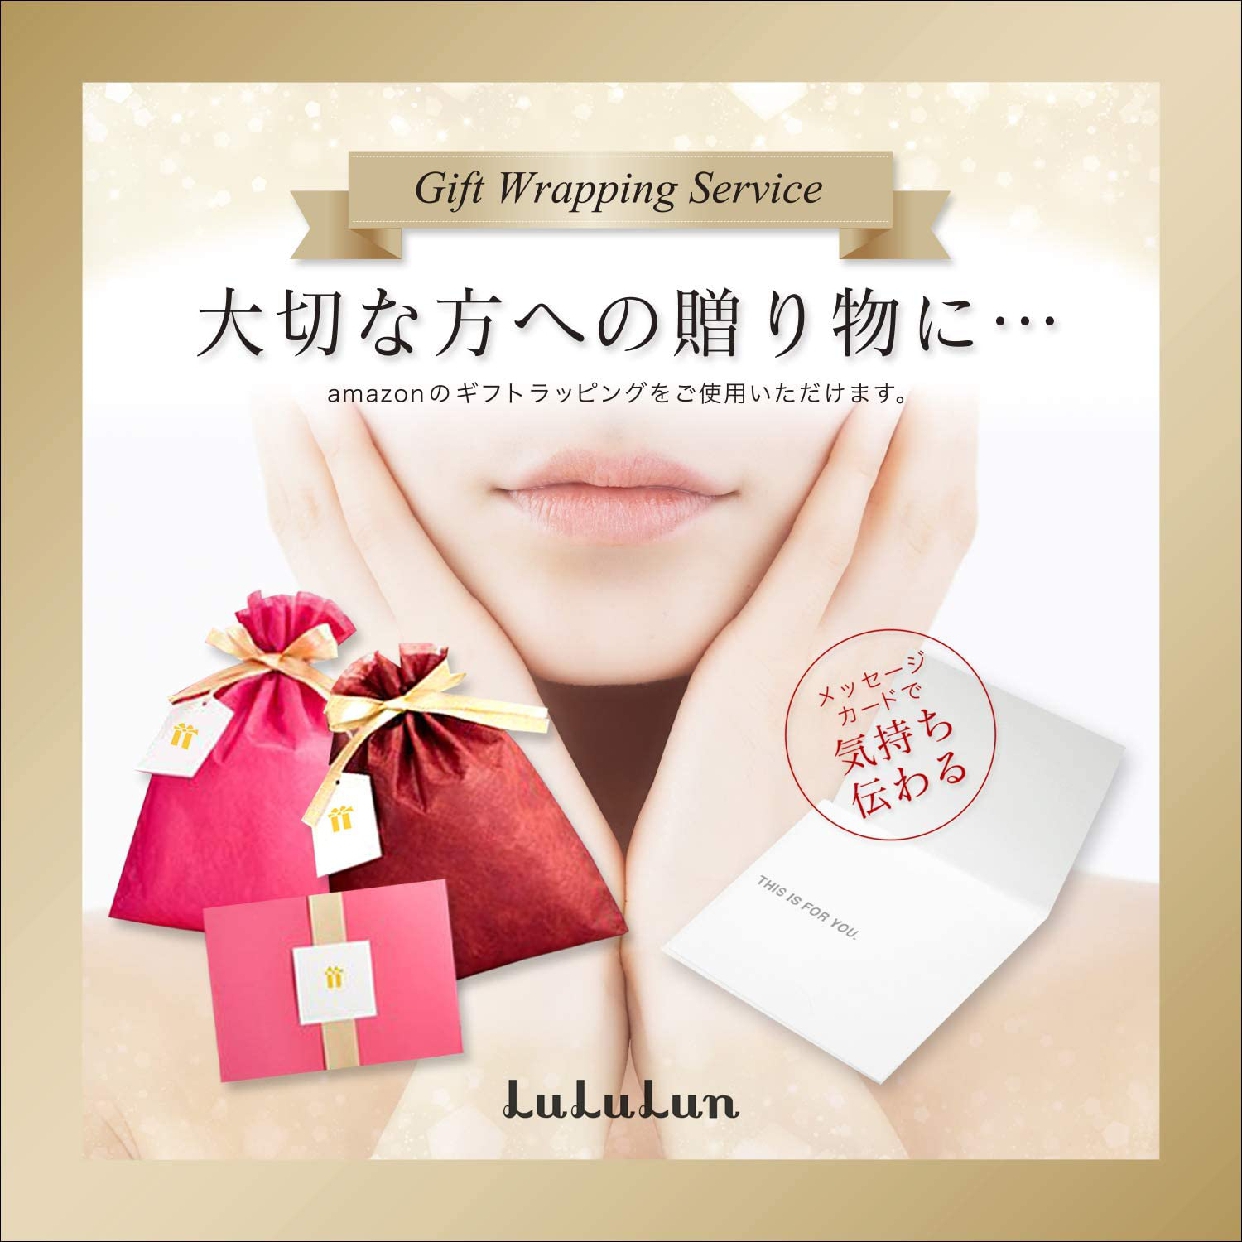 LuLuLun(ルルルン) ワンナイト レスキュー 大人レスキュー 濃密保湿の商品画像サムネ5 